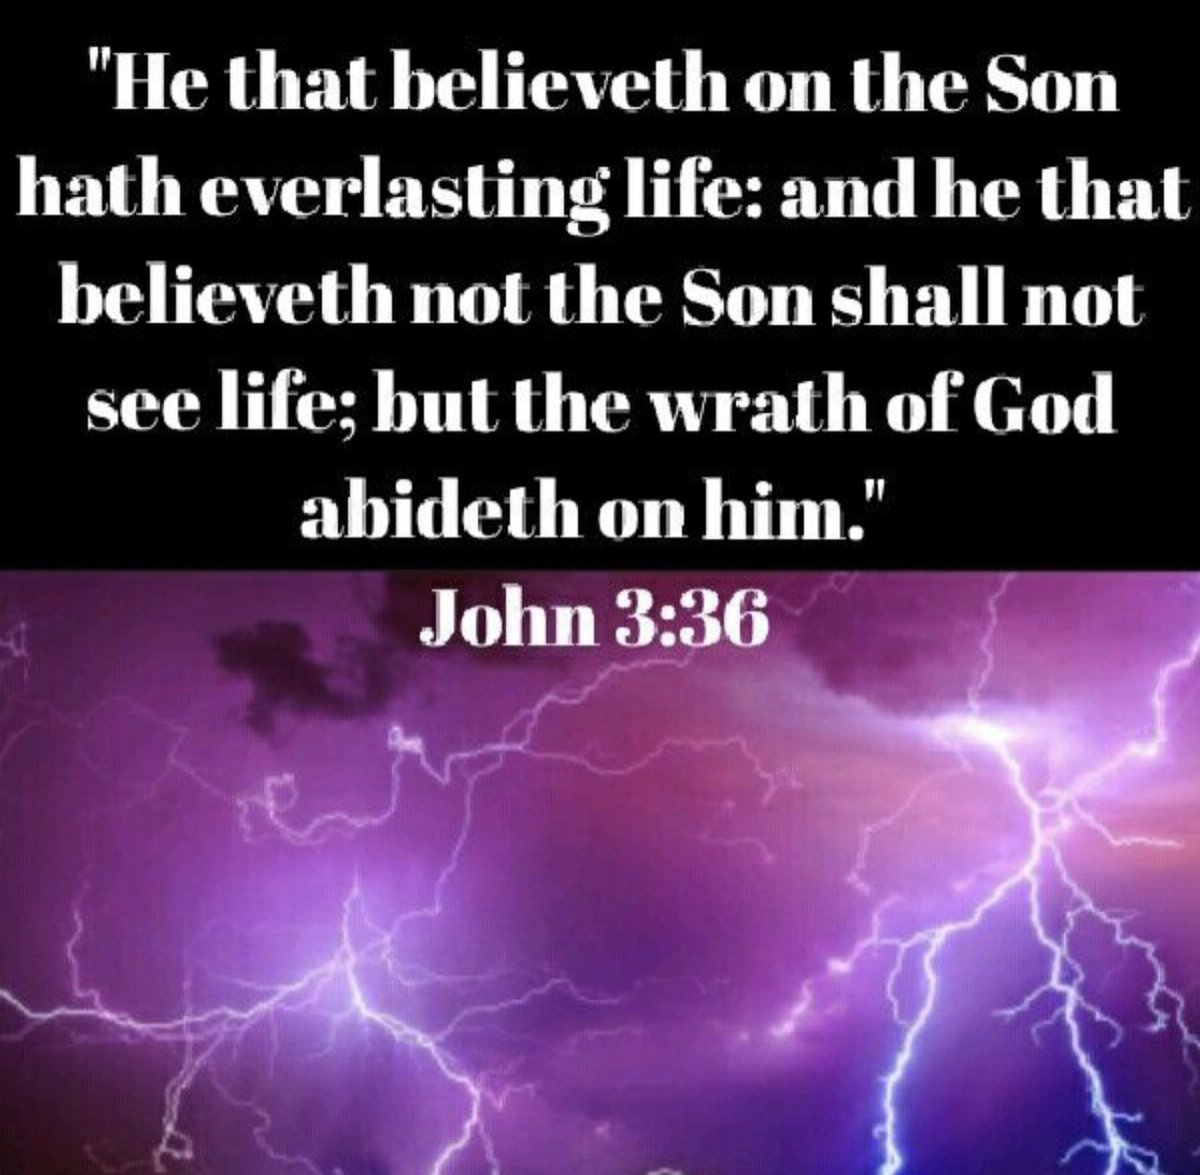 John 3:36
King James Version
“He that believeth on the Son hath everlasting life: and he that believeth not the Son shall not see life; but the wrath of God abideth on him.” 
#JesusIsLord
#Believe